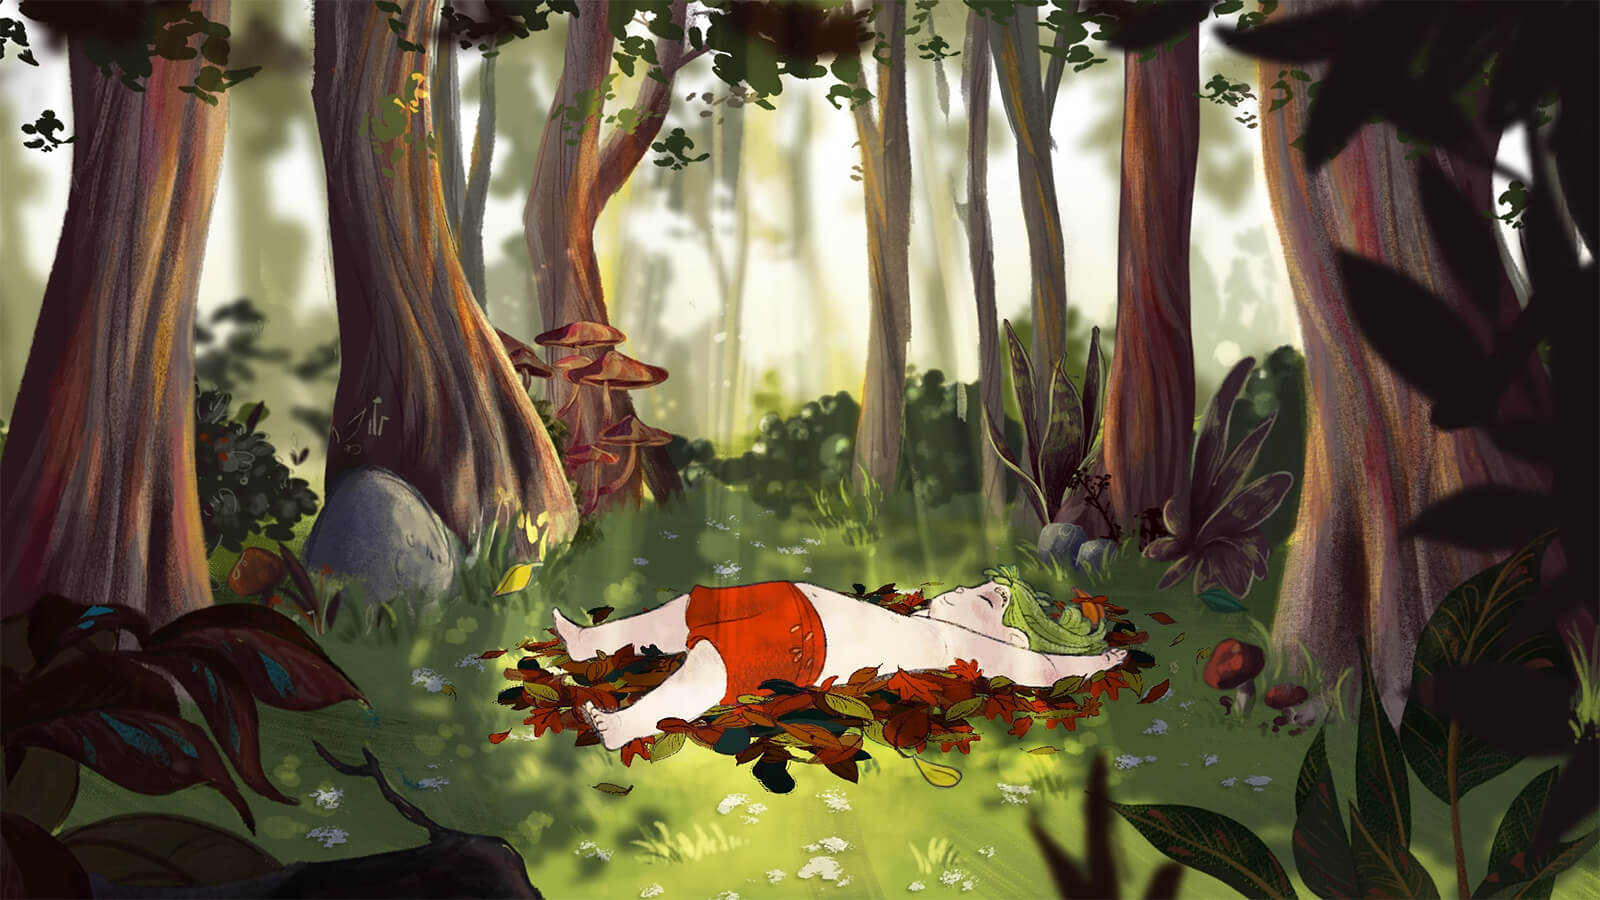 A young child relaxes while laying on top of a pile of leaves within a forest